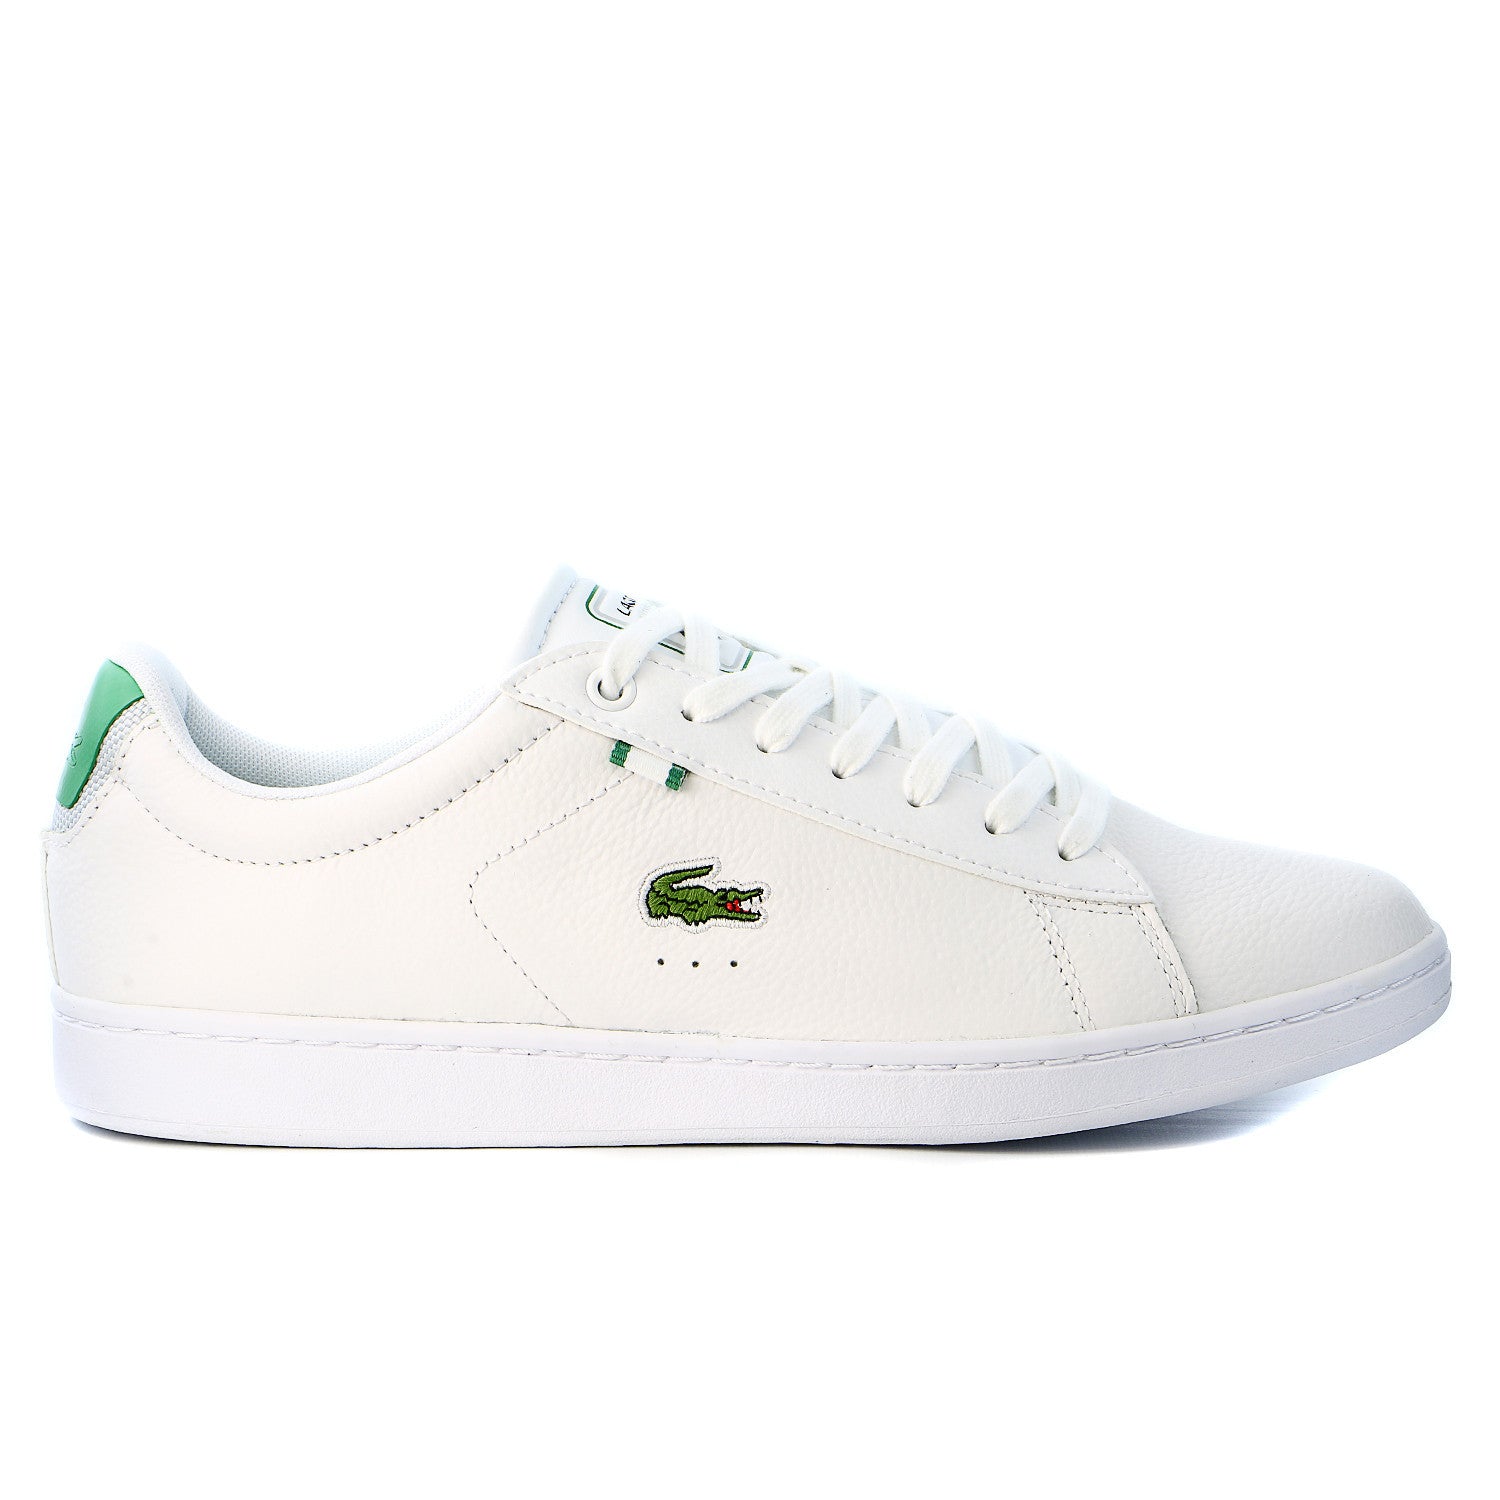 Lacoste Carnaby EVO Leather Training Sneaker Shoe - White/Green - - Shoplifestyle